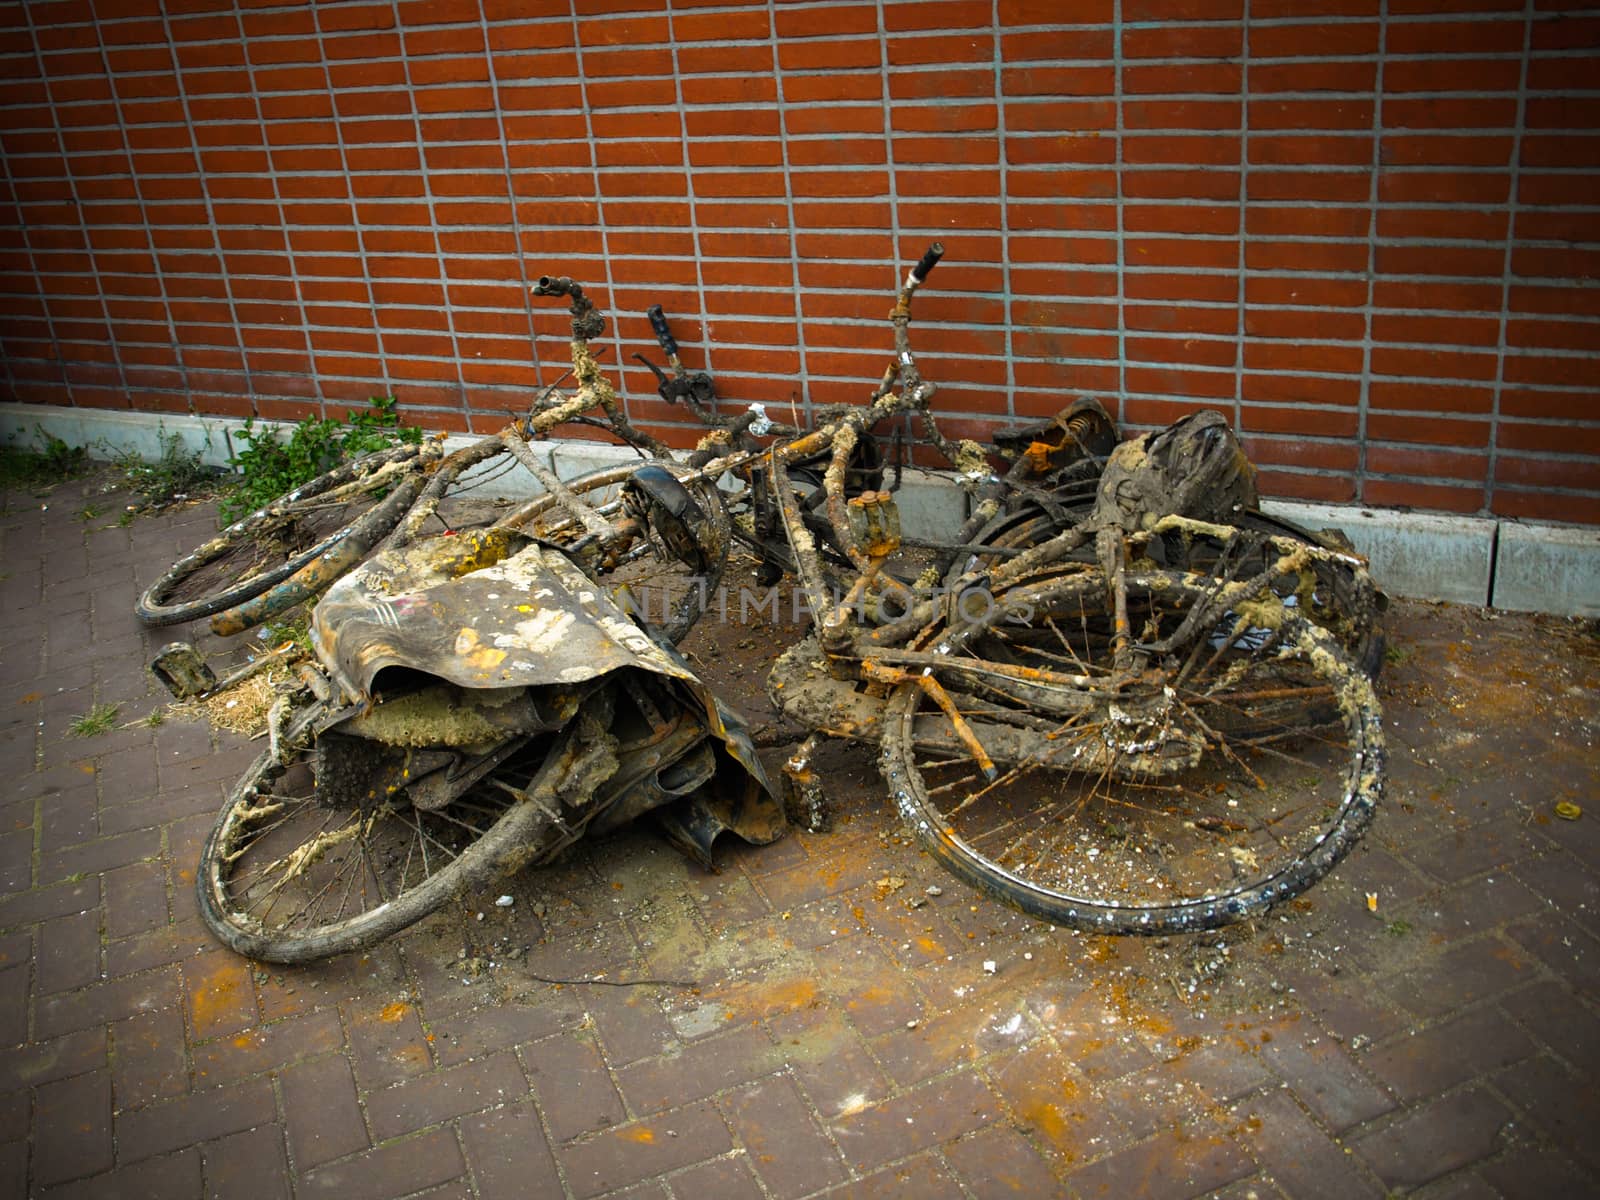 Bicycles pulled out of canal in Amsterdam. Old and rusty bikes piled up in street.